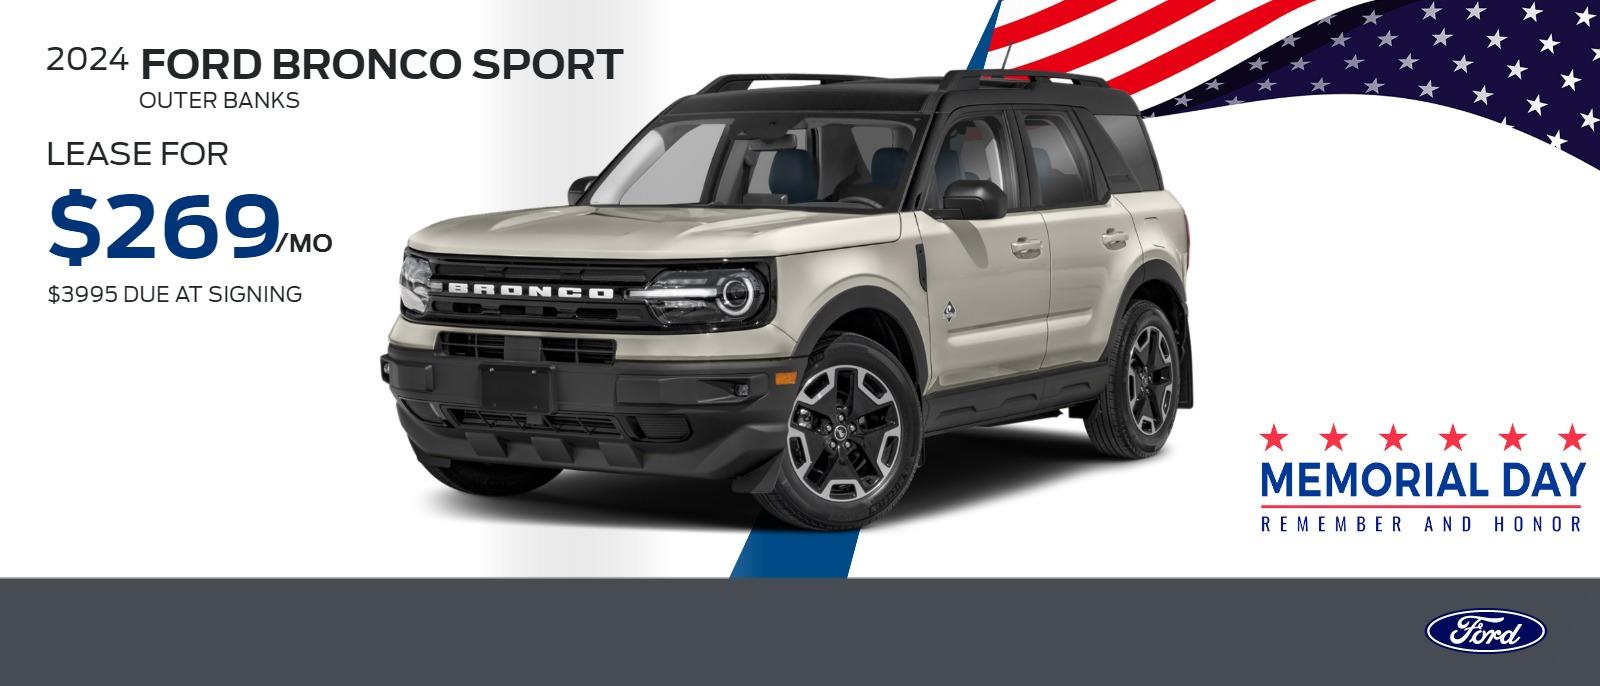 2024 Bronco Sport Outer Banks
$269 per month lease $3995 due at signing